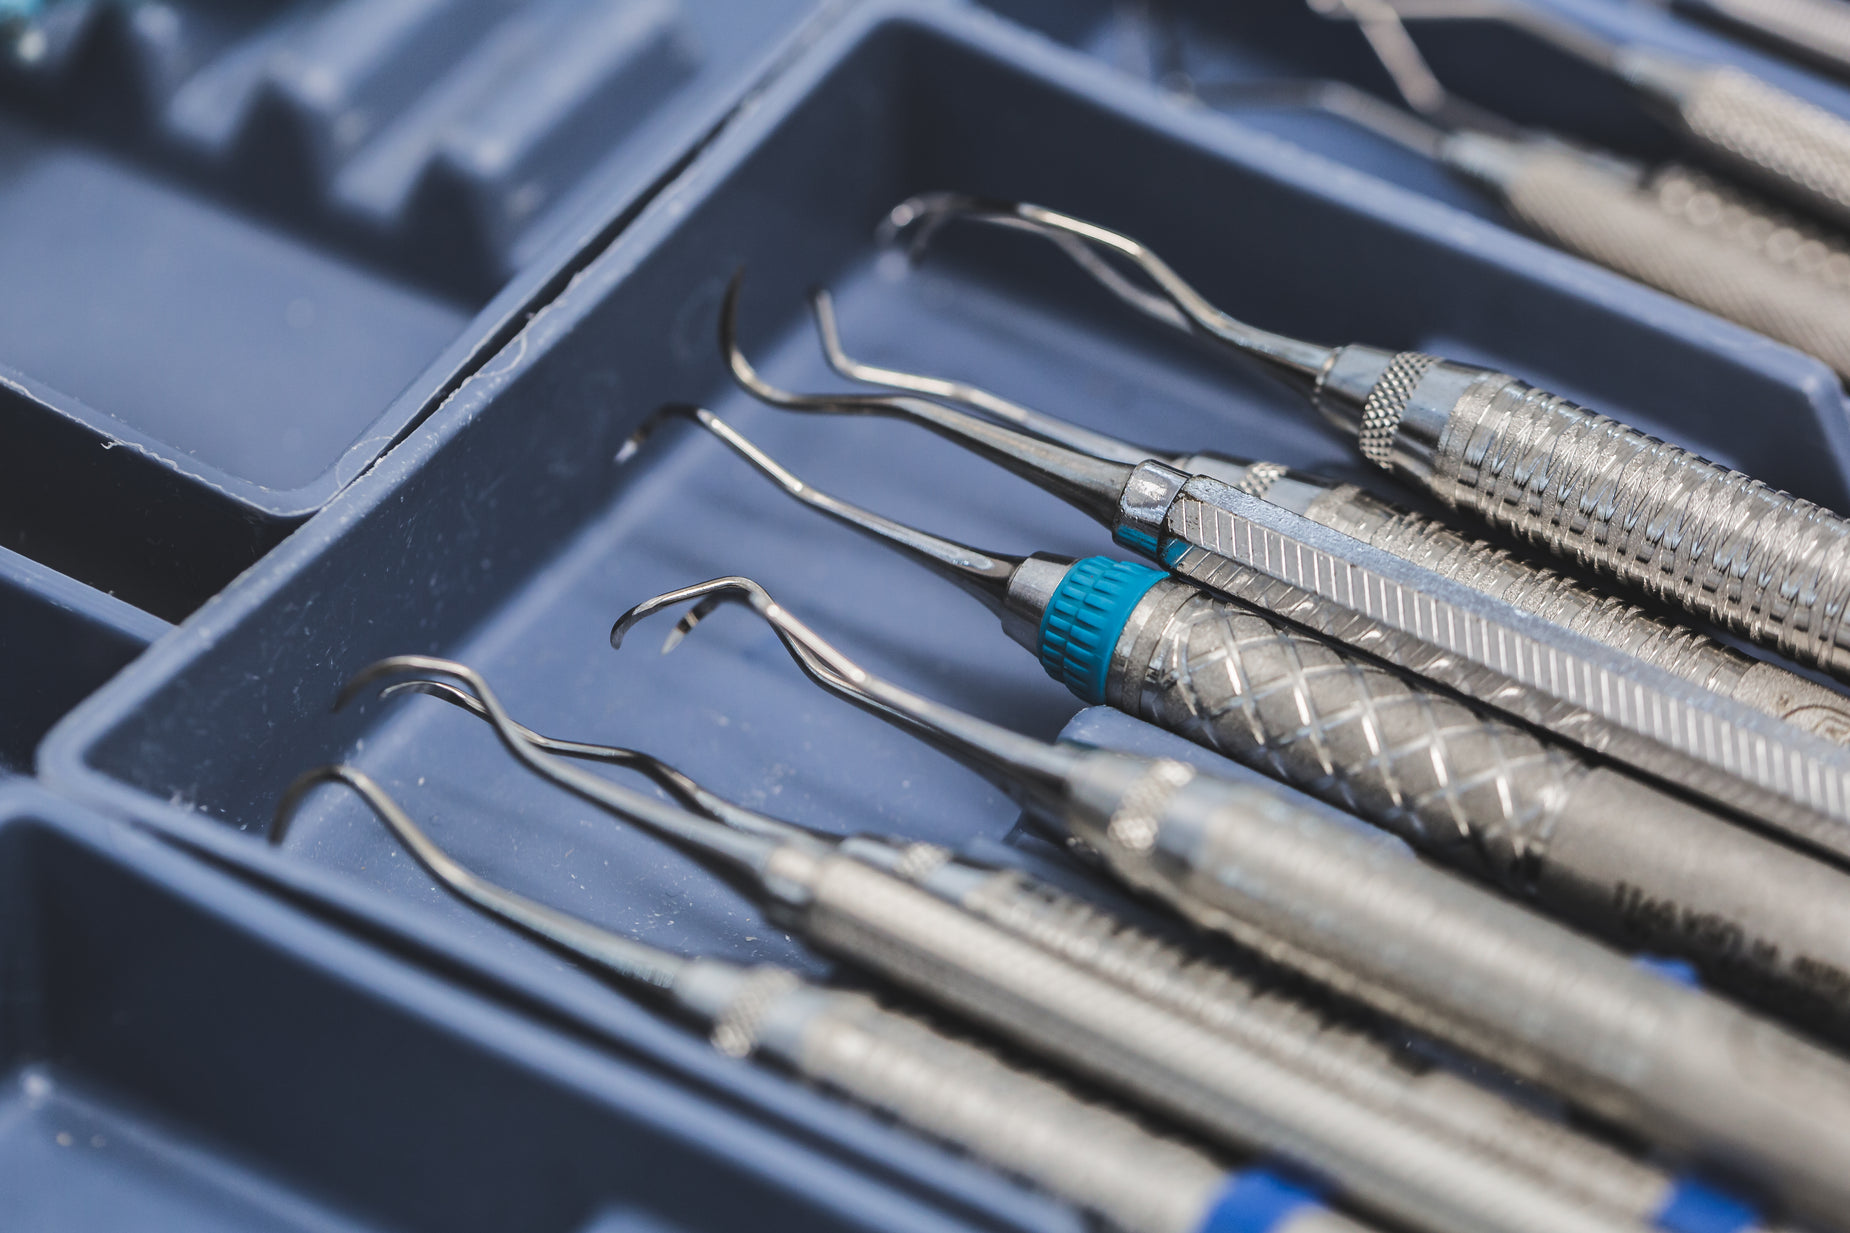 dental instruments in a storage tray on a table